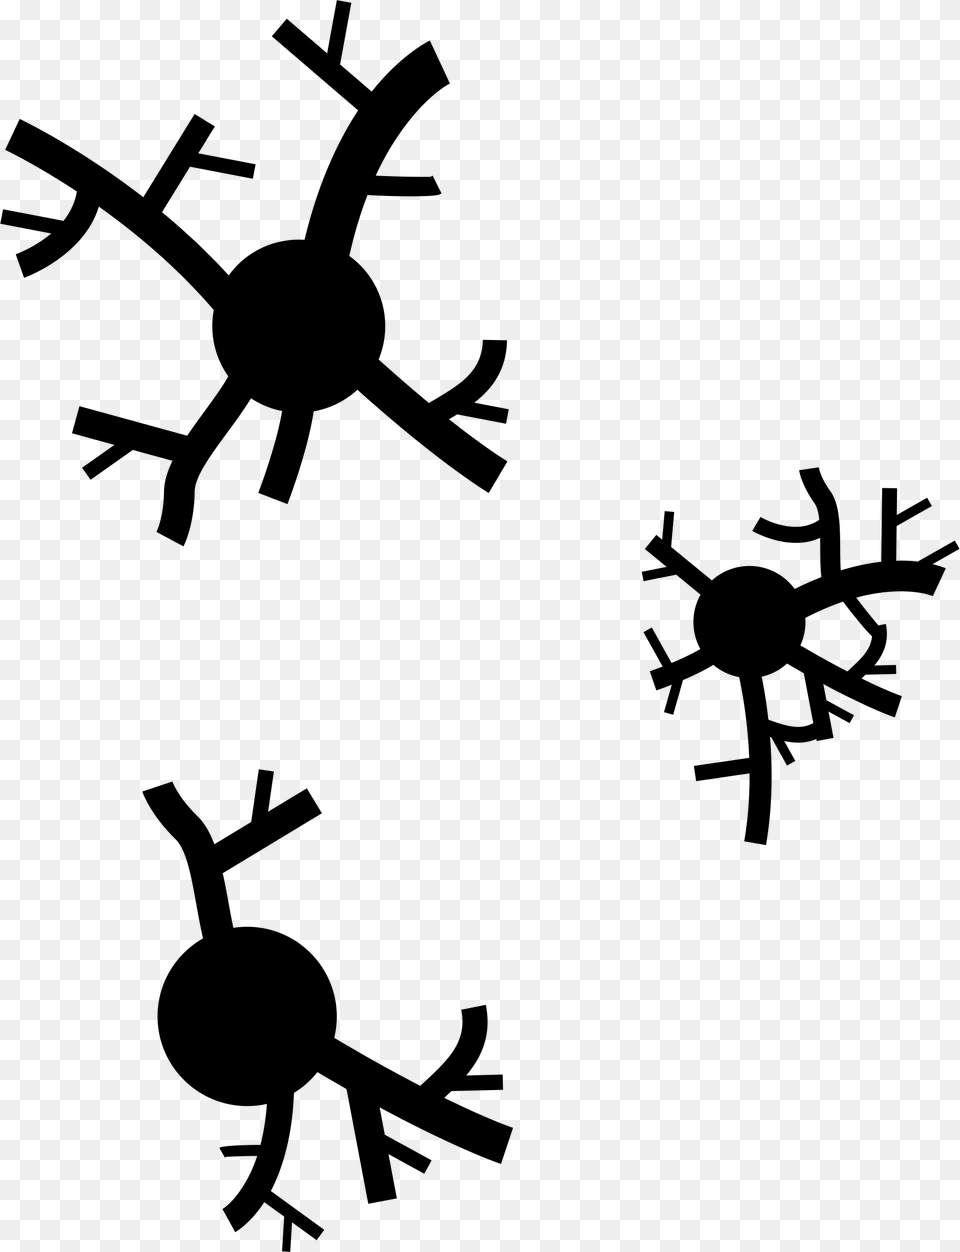 This Icons Design Of Burnt Trees, Gray Free Transparent Png